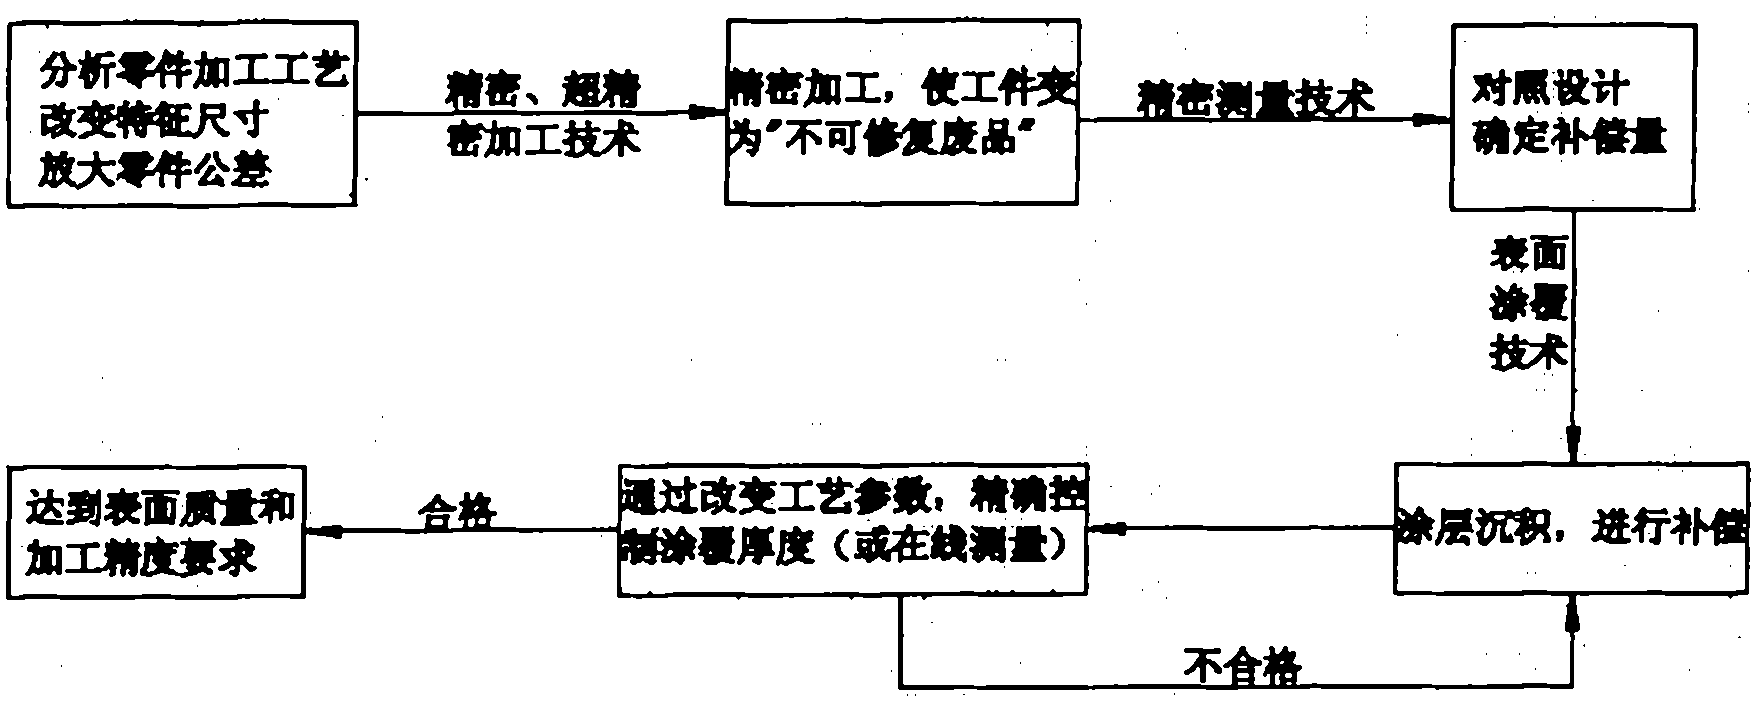 Integrated manufacturing method of microminiature parts based on surface coating